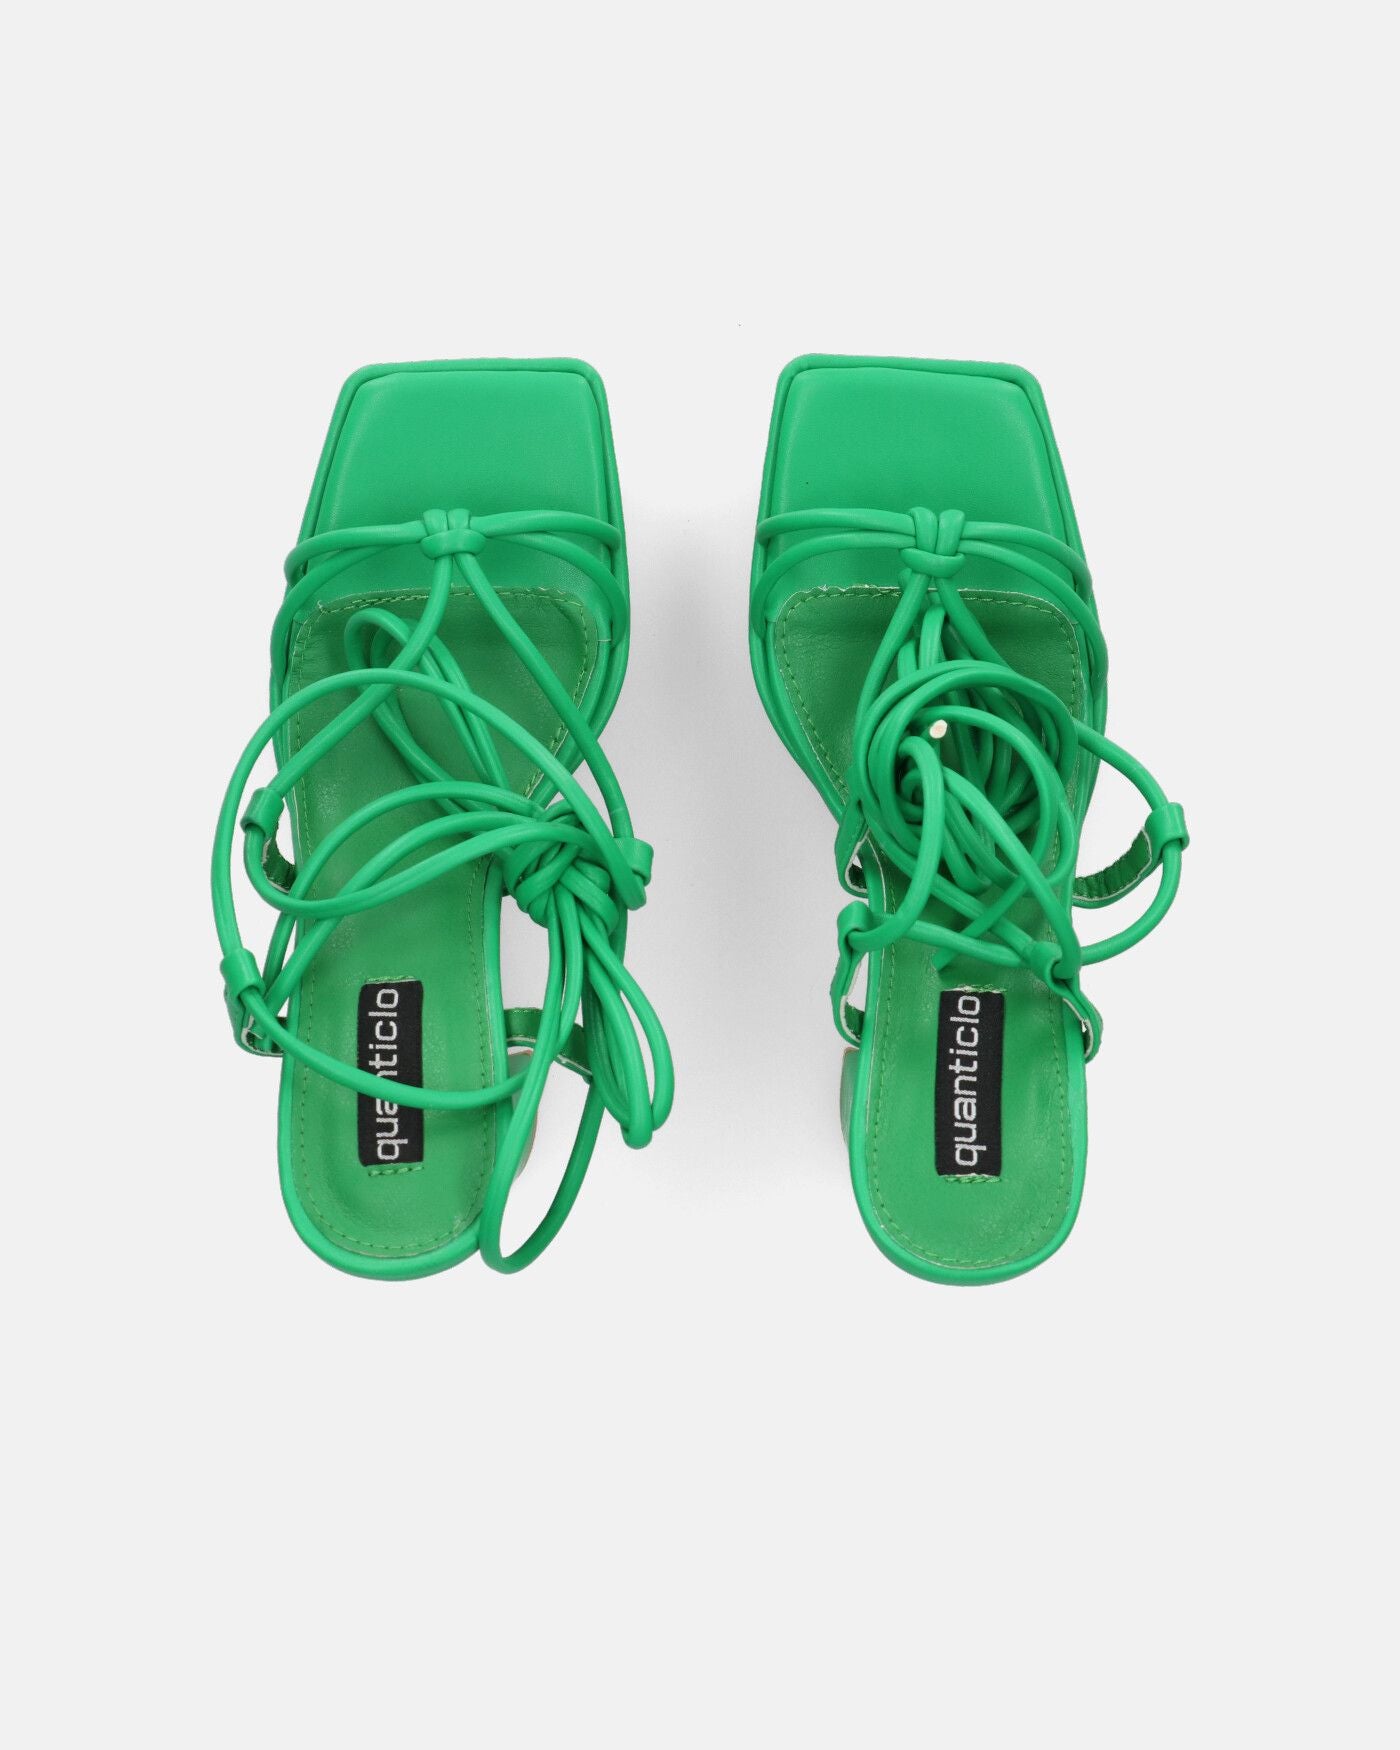 NADITZA - sandals with high heel and laces in green PU